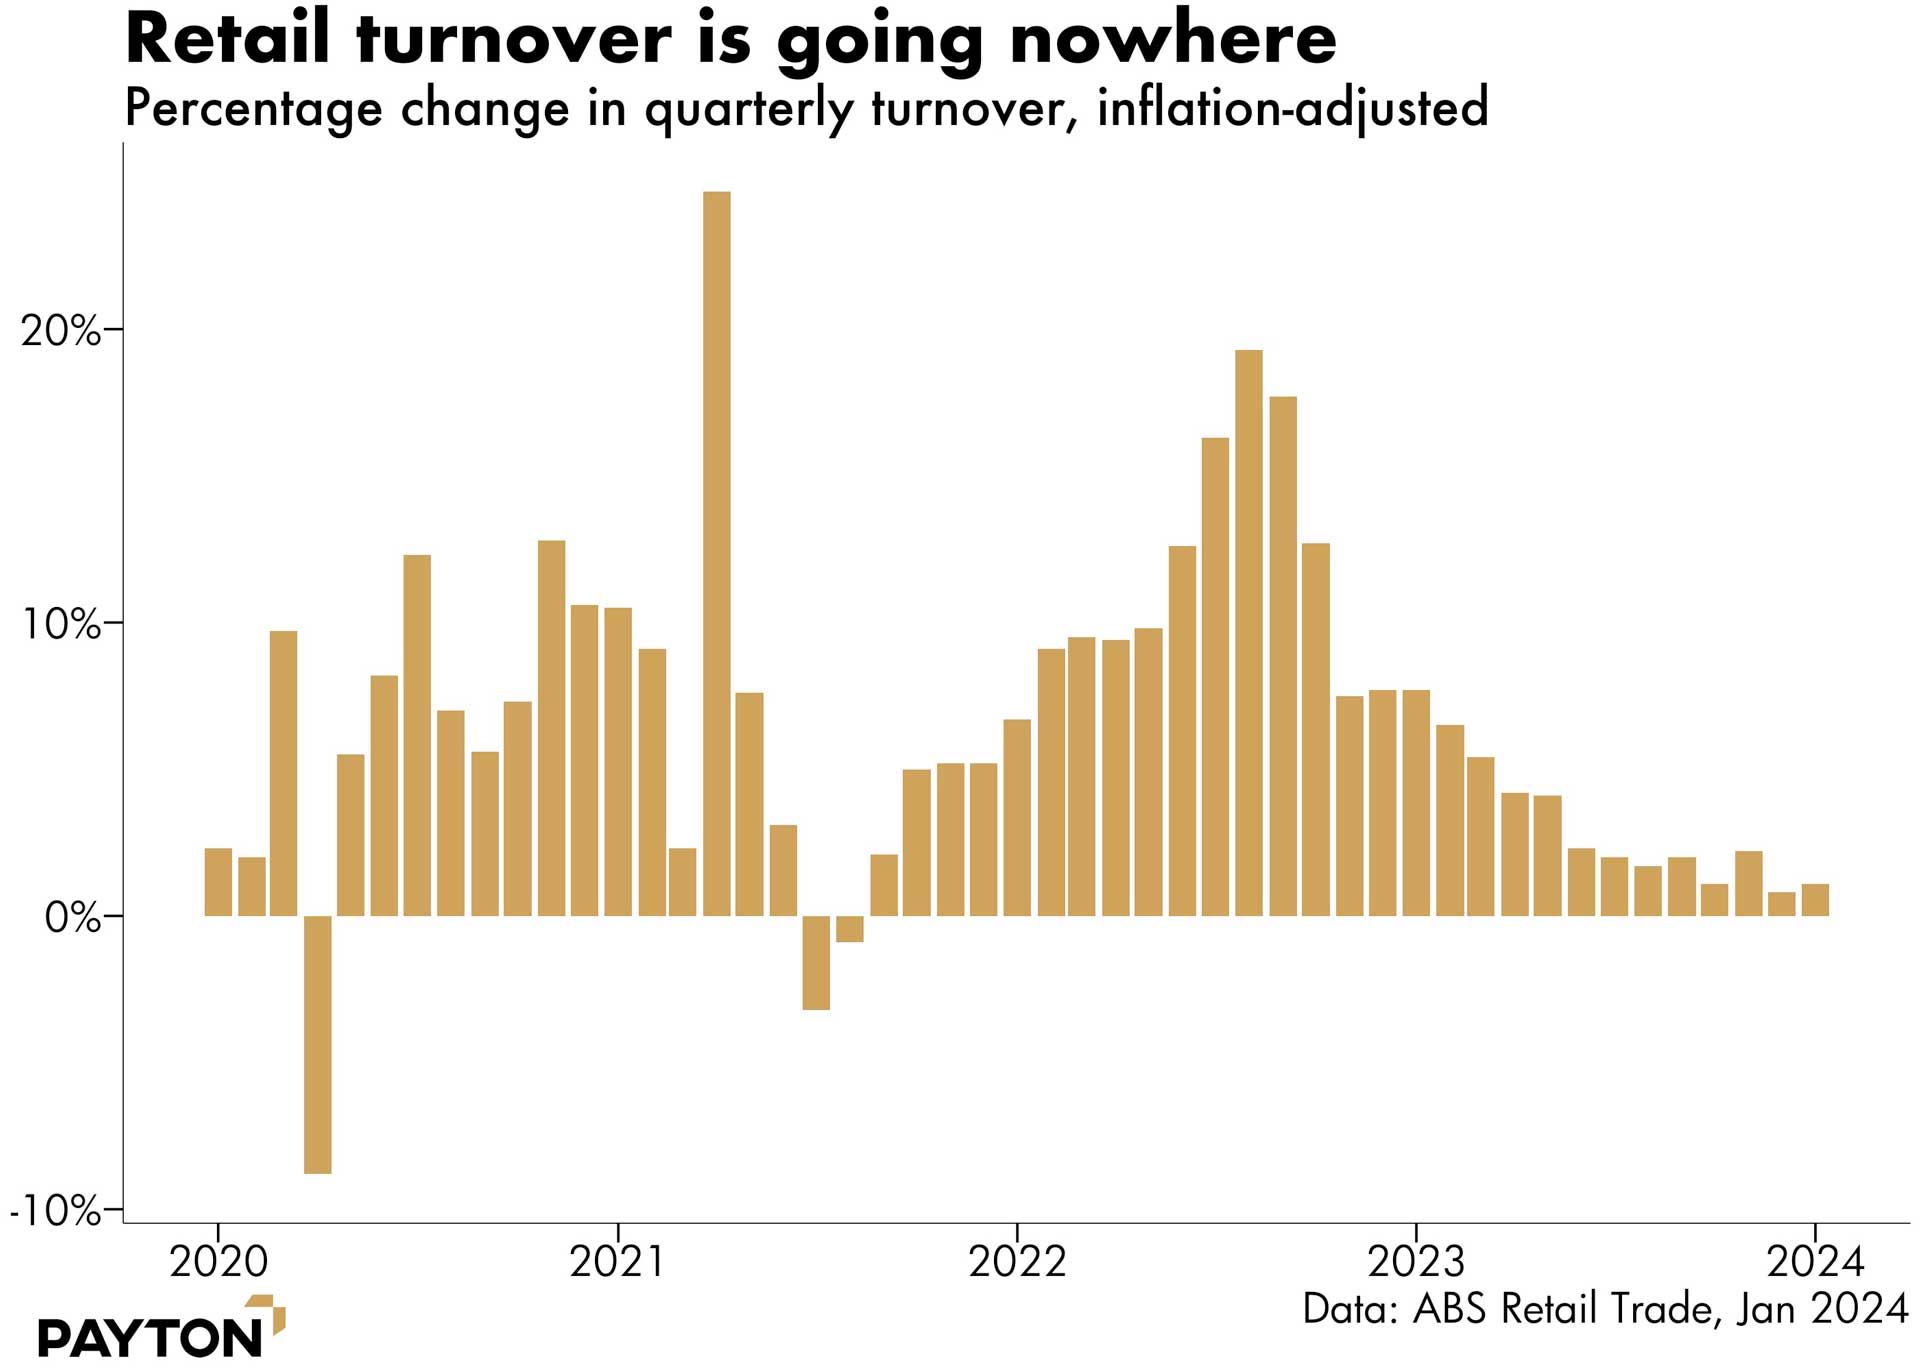 Retail turnover is going nowhere